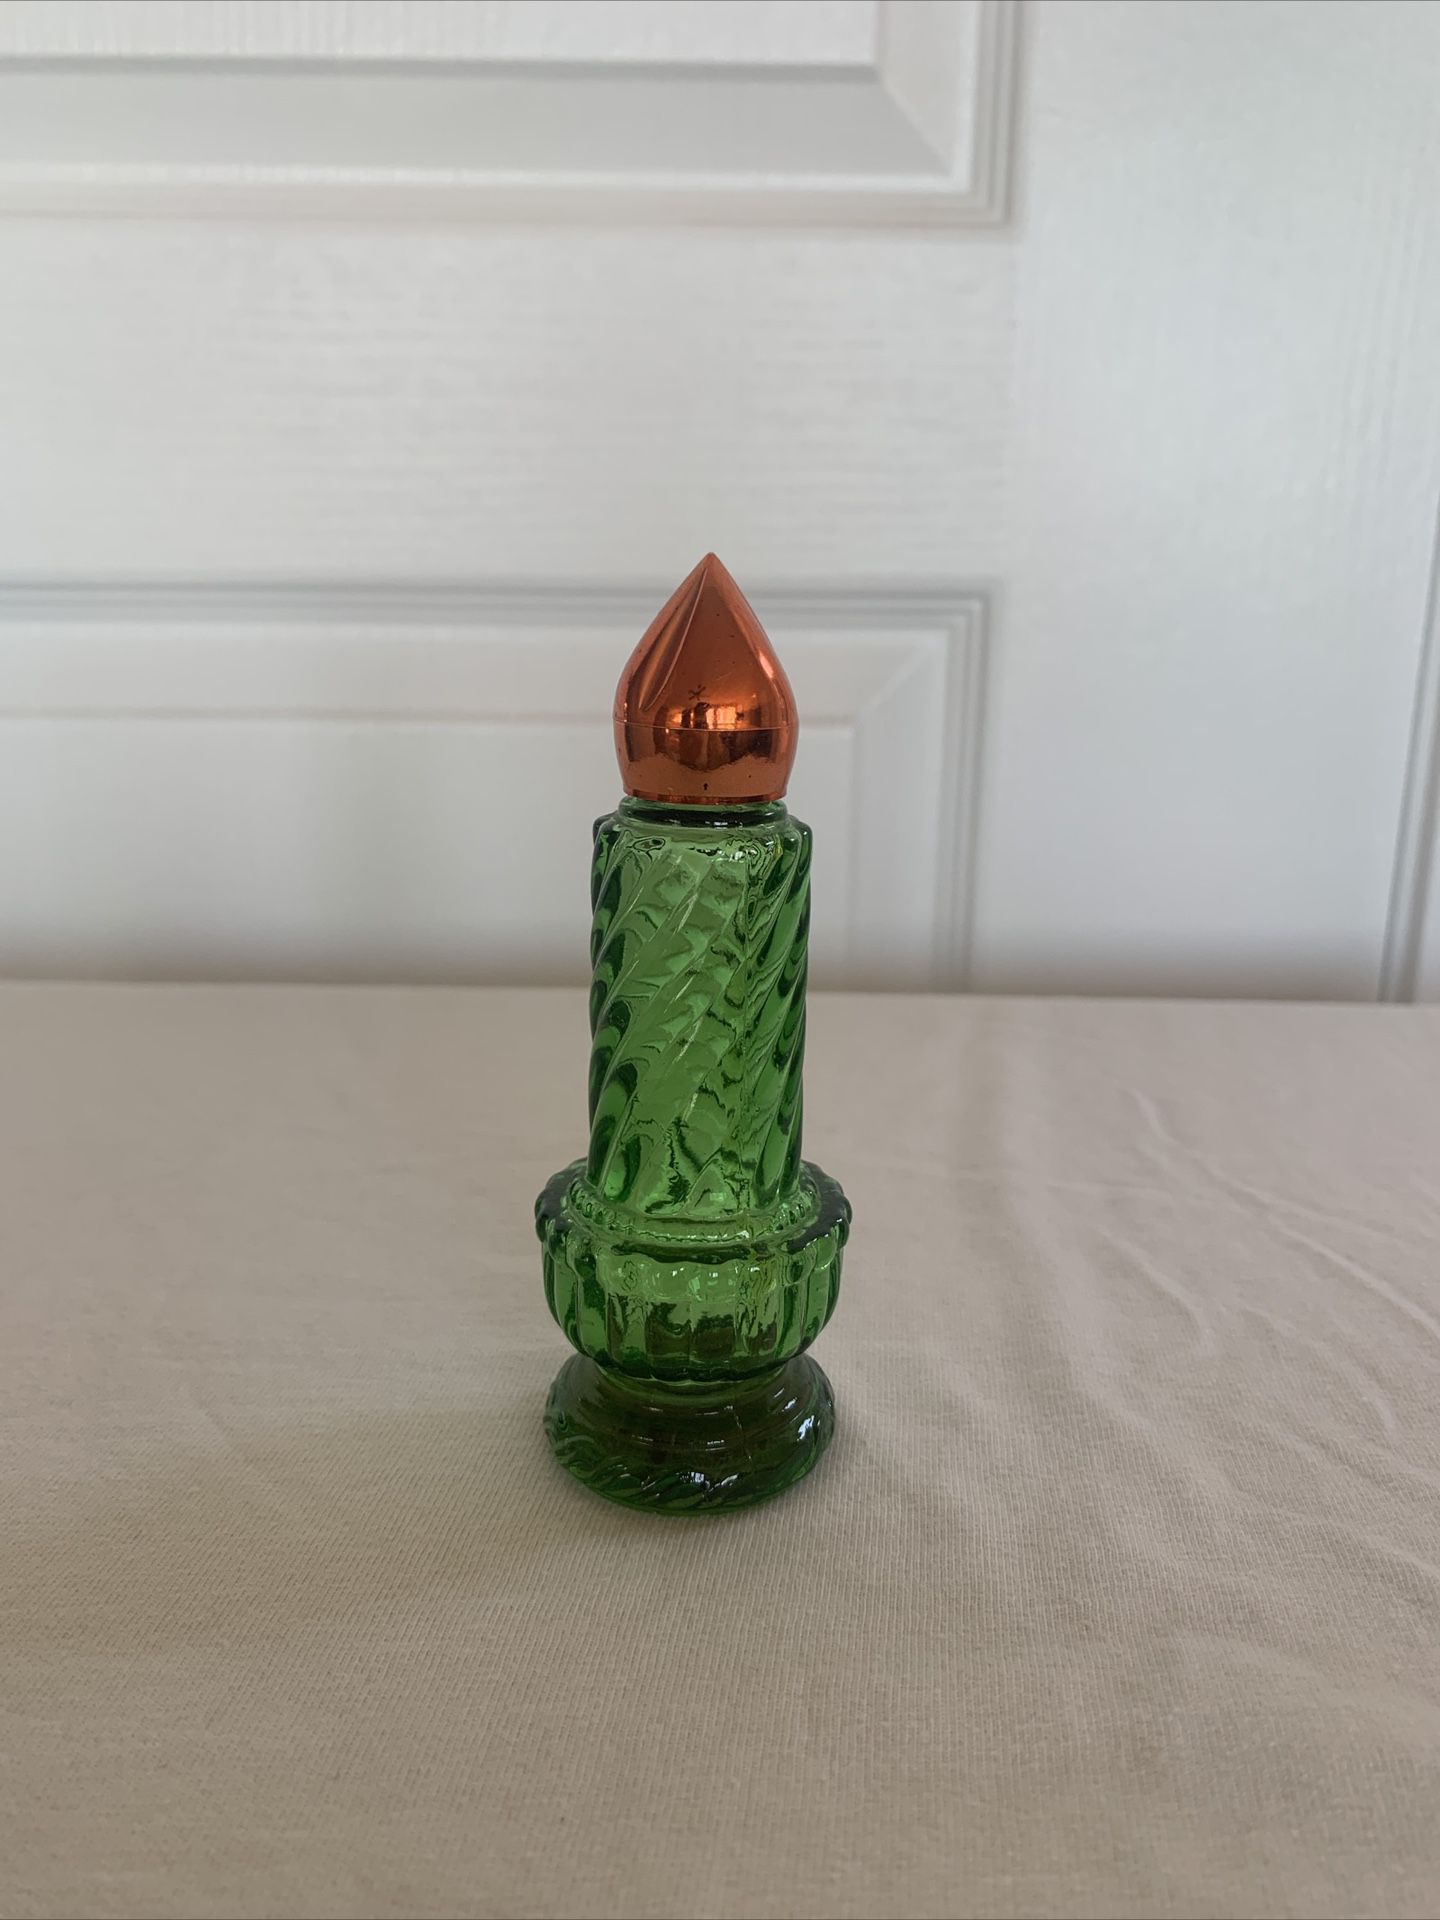 Vintage Avon 1970s Glass Christmas Candle Cologne Bottle-collectibles 